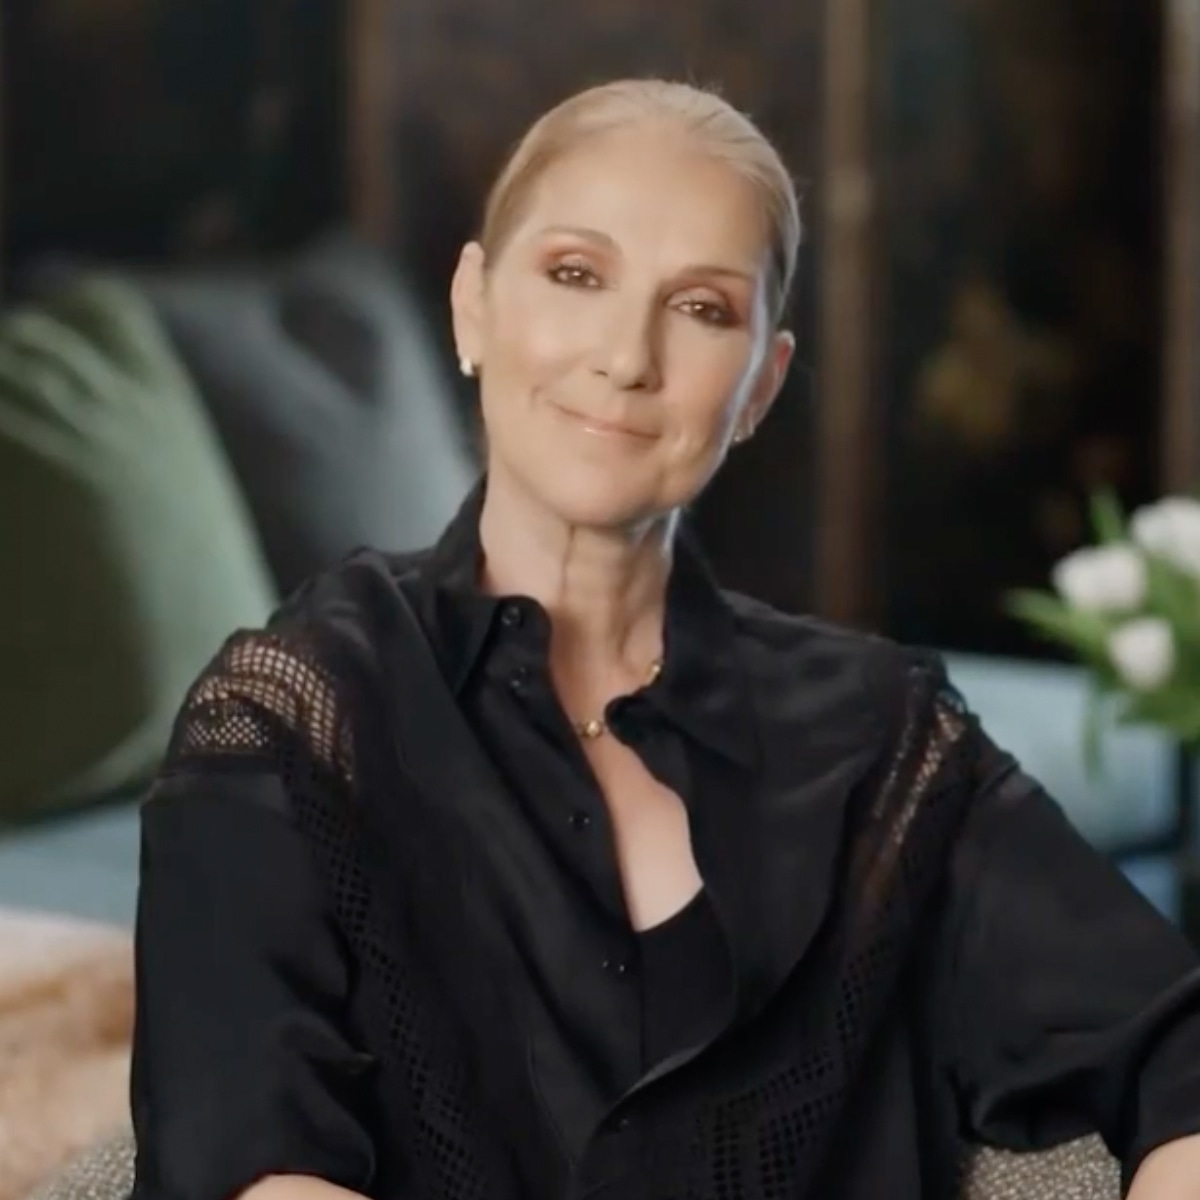 Celine Dion, Stiff person syndrome has been diagnosed | Celine Dion health